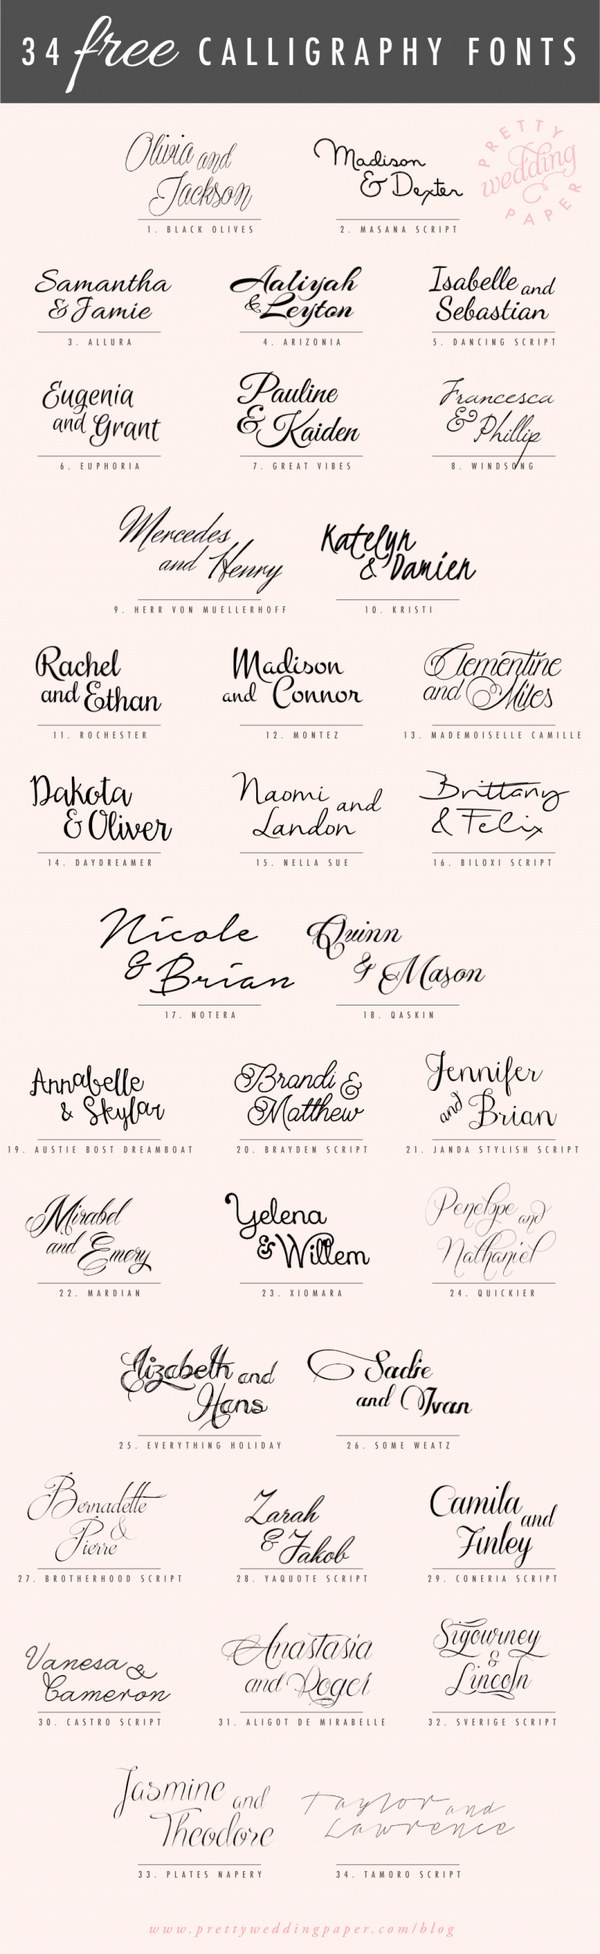 FREE calligraphic script fonts for hand-lettered, flowing wedding stationery